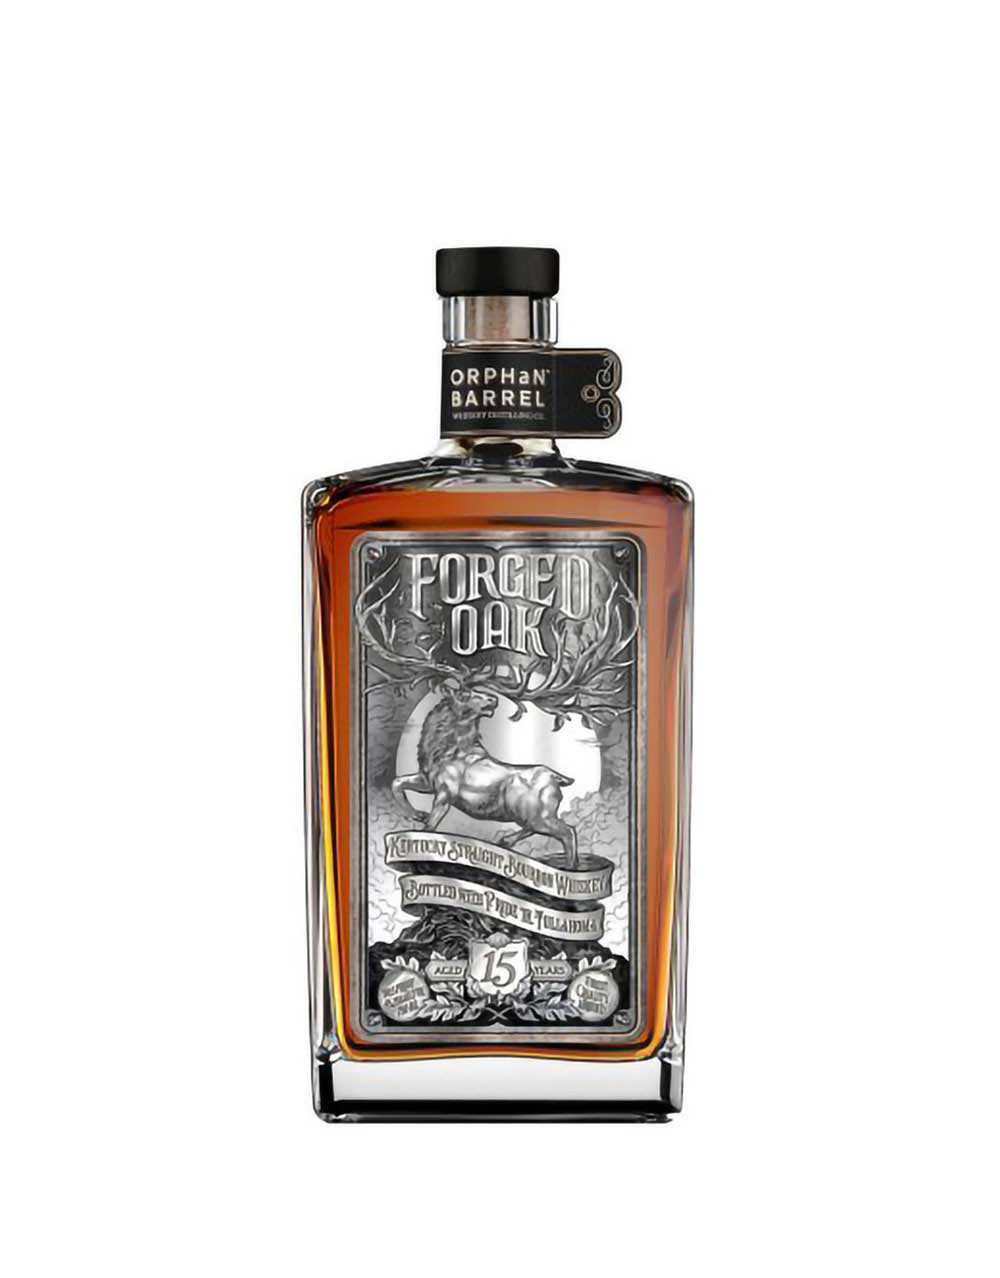 Orphan Barrel Forged Oak 15 Year Old Kentucky Straight Bourbon Whiskey